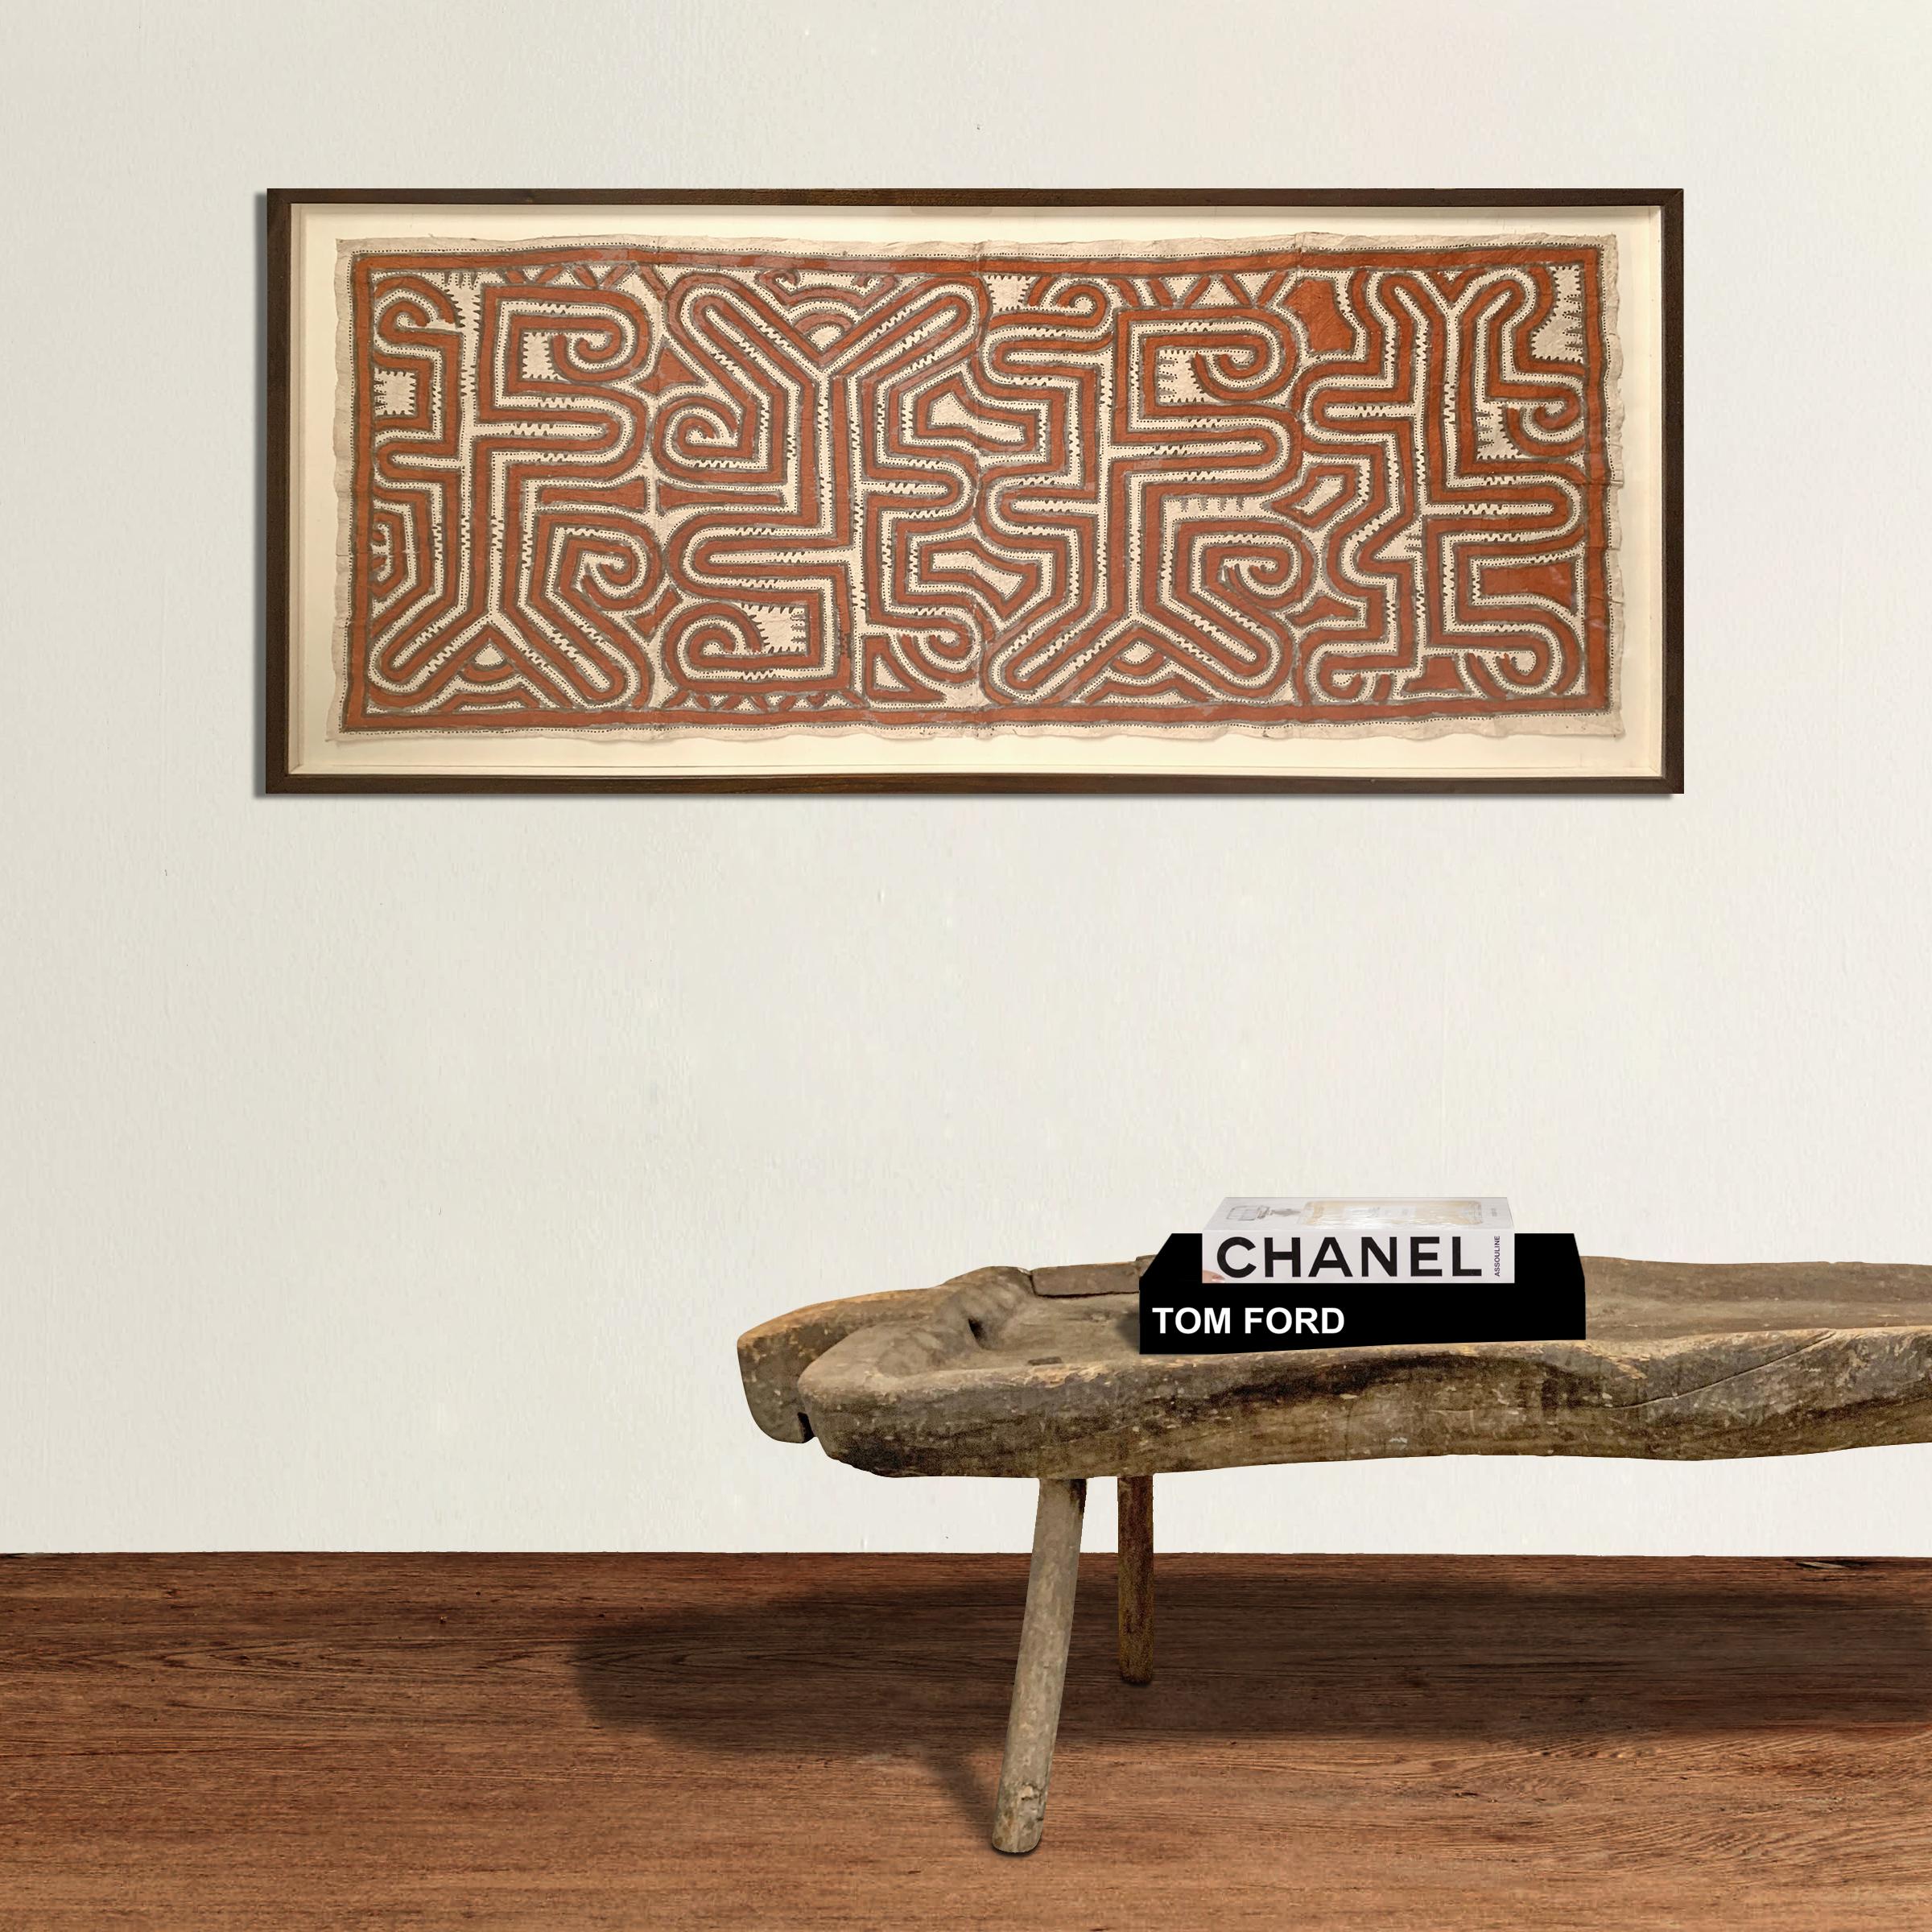 An incredible framed mid-20th century Tapa, or barkcloth, with hand painted red and black figurative icons, from the Kanak people of New Caledonia. New Caledonia is a French island territory in the South Pacific. Tapa are not woven textiles but,